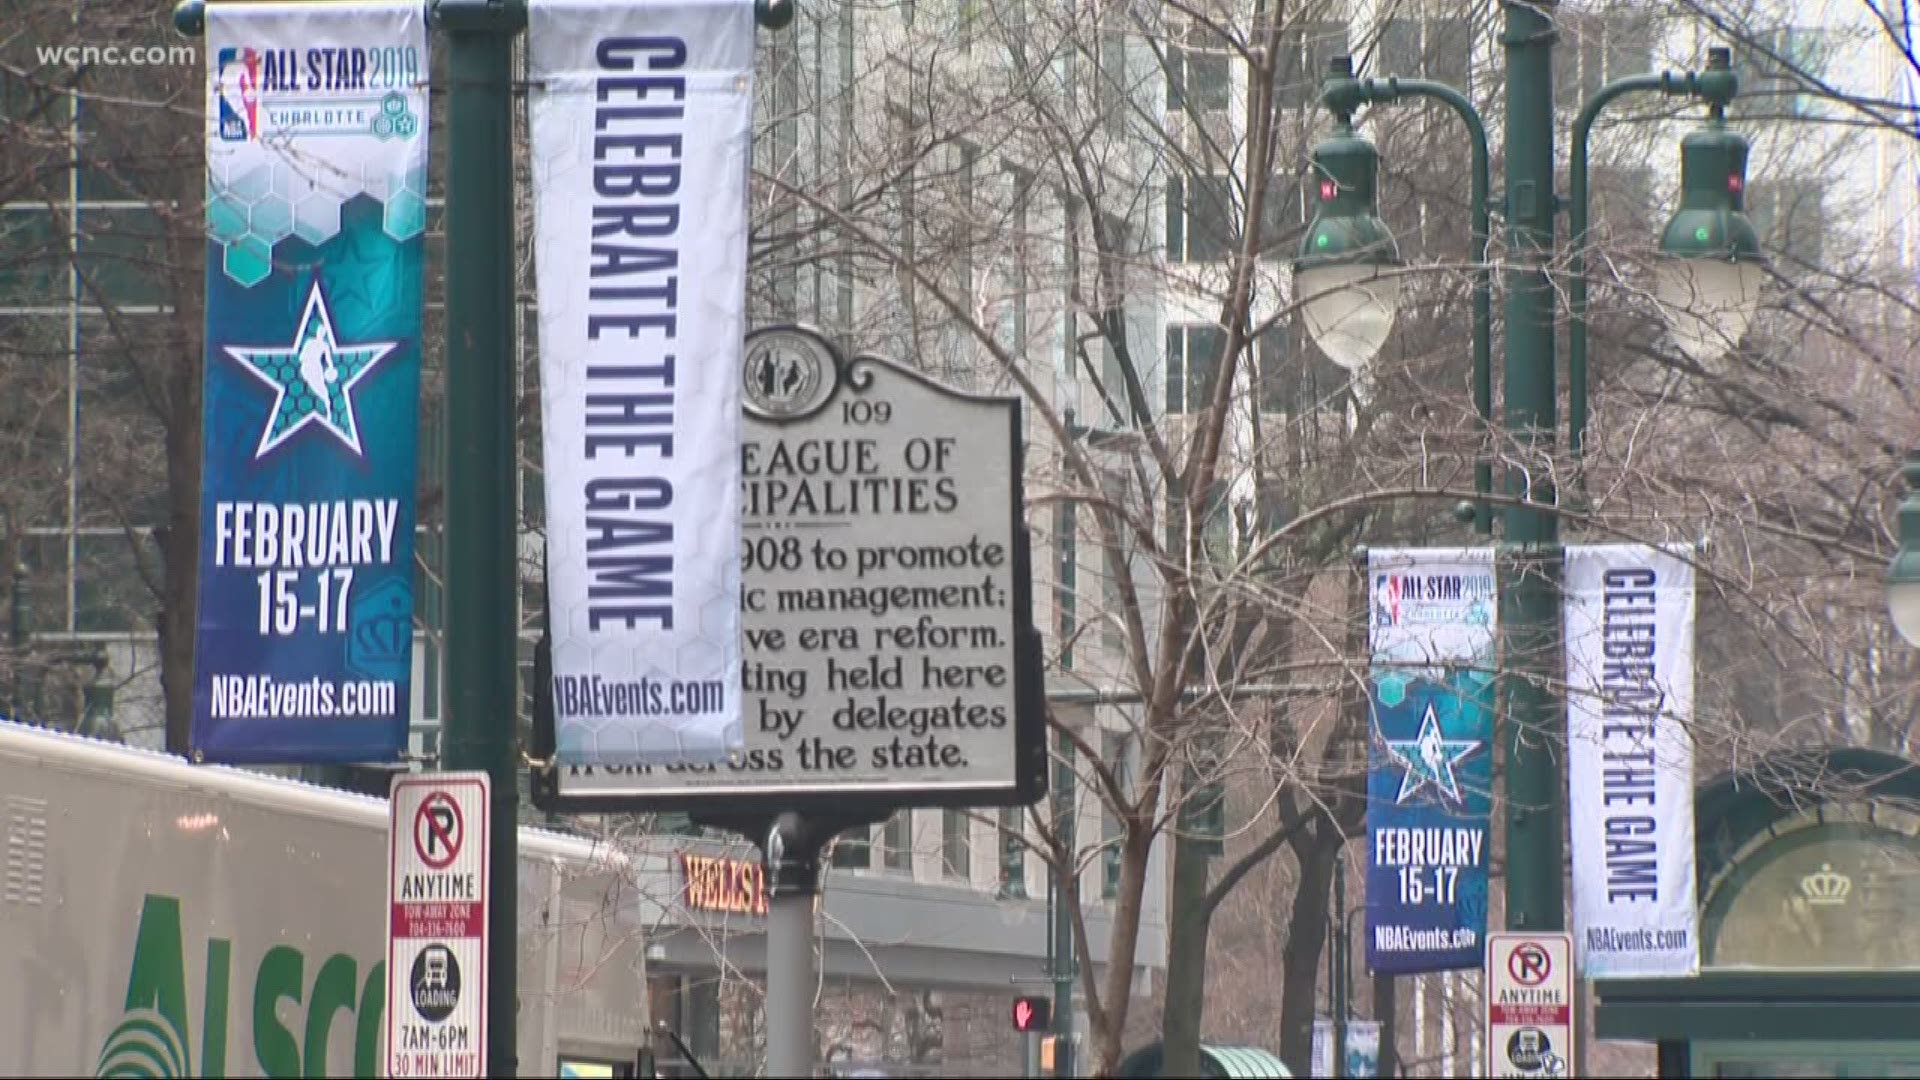 The NBA All-Star Game will bring tens of thousands of visitors to Charlotte, which could lead to major traffic problems in uptown.